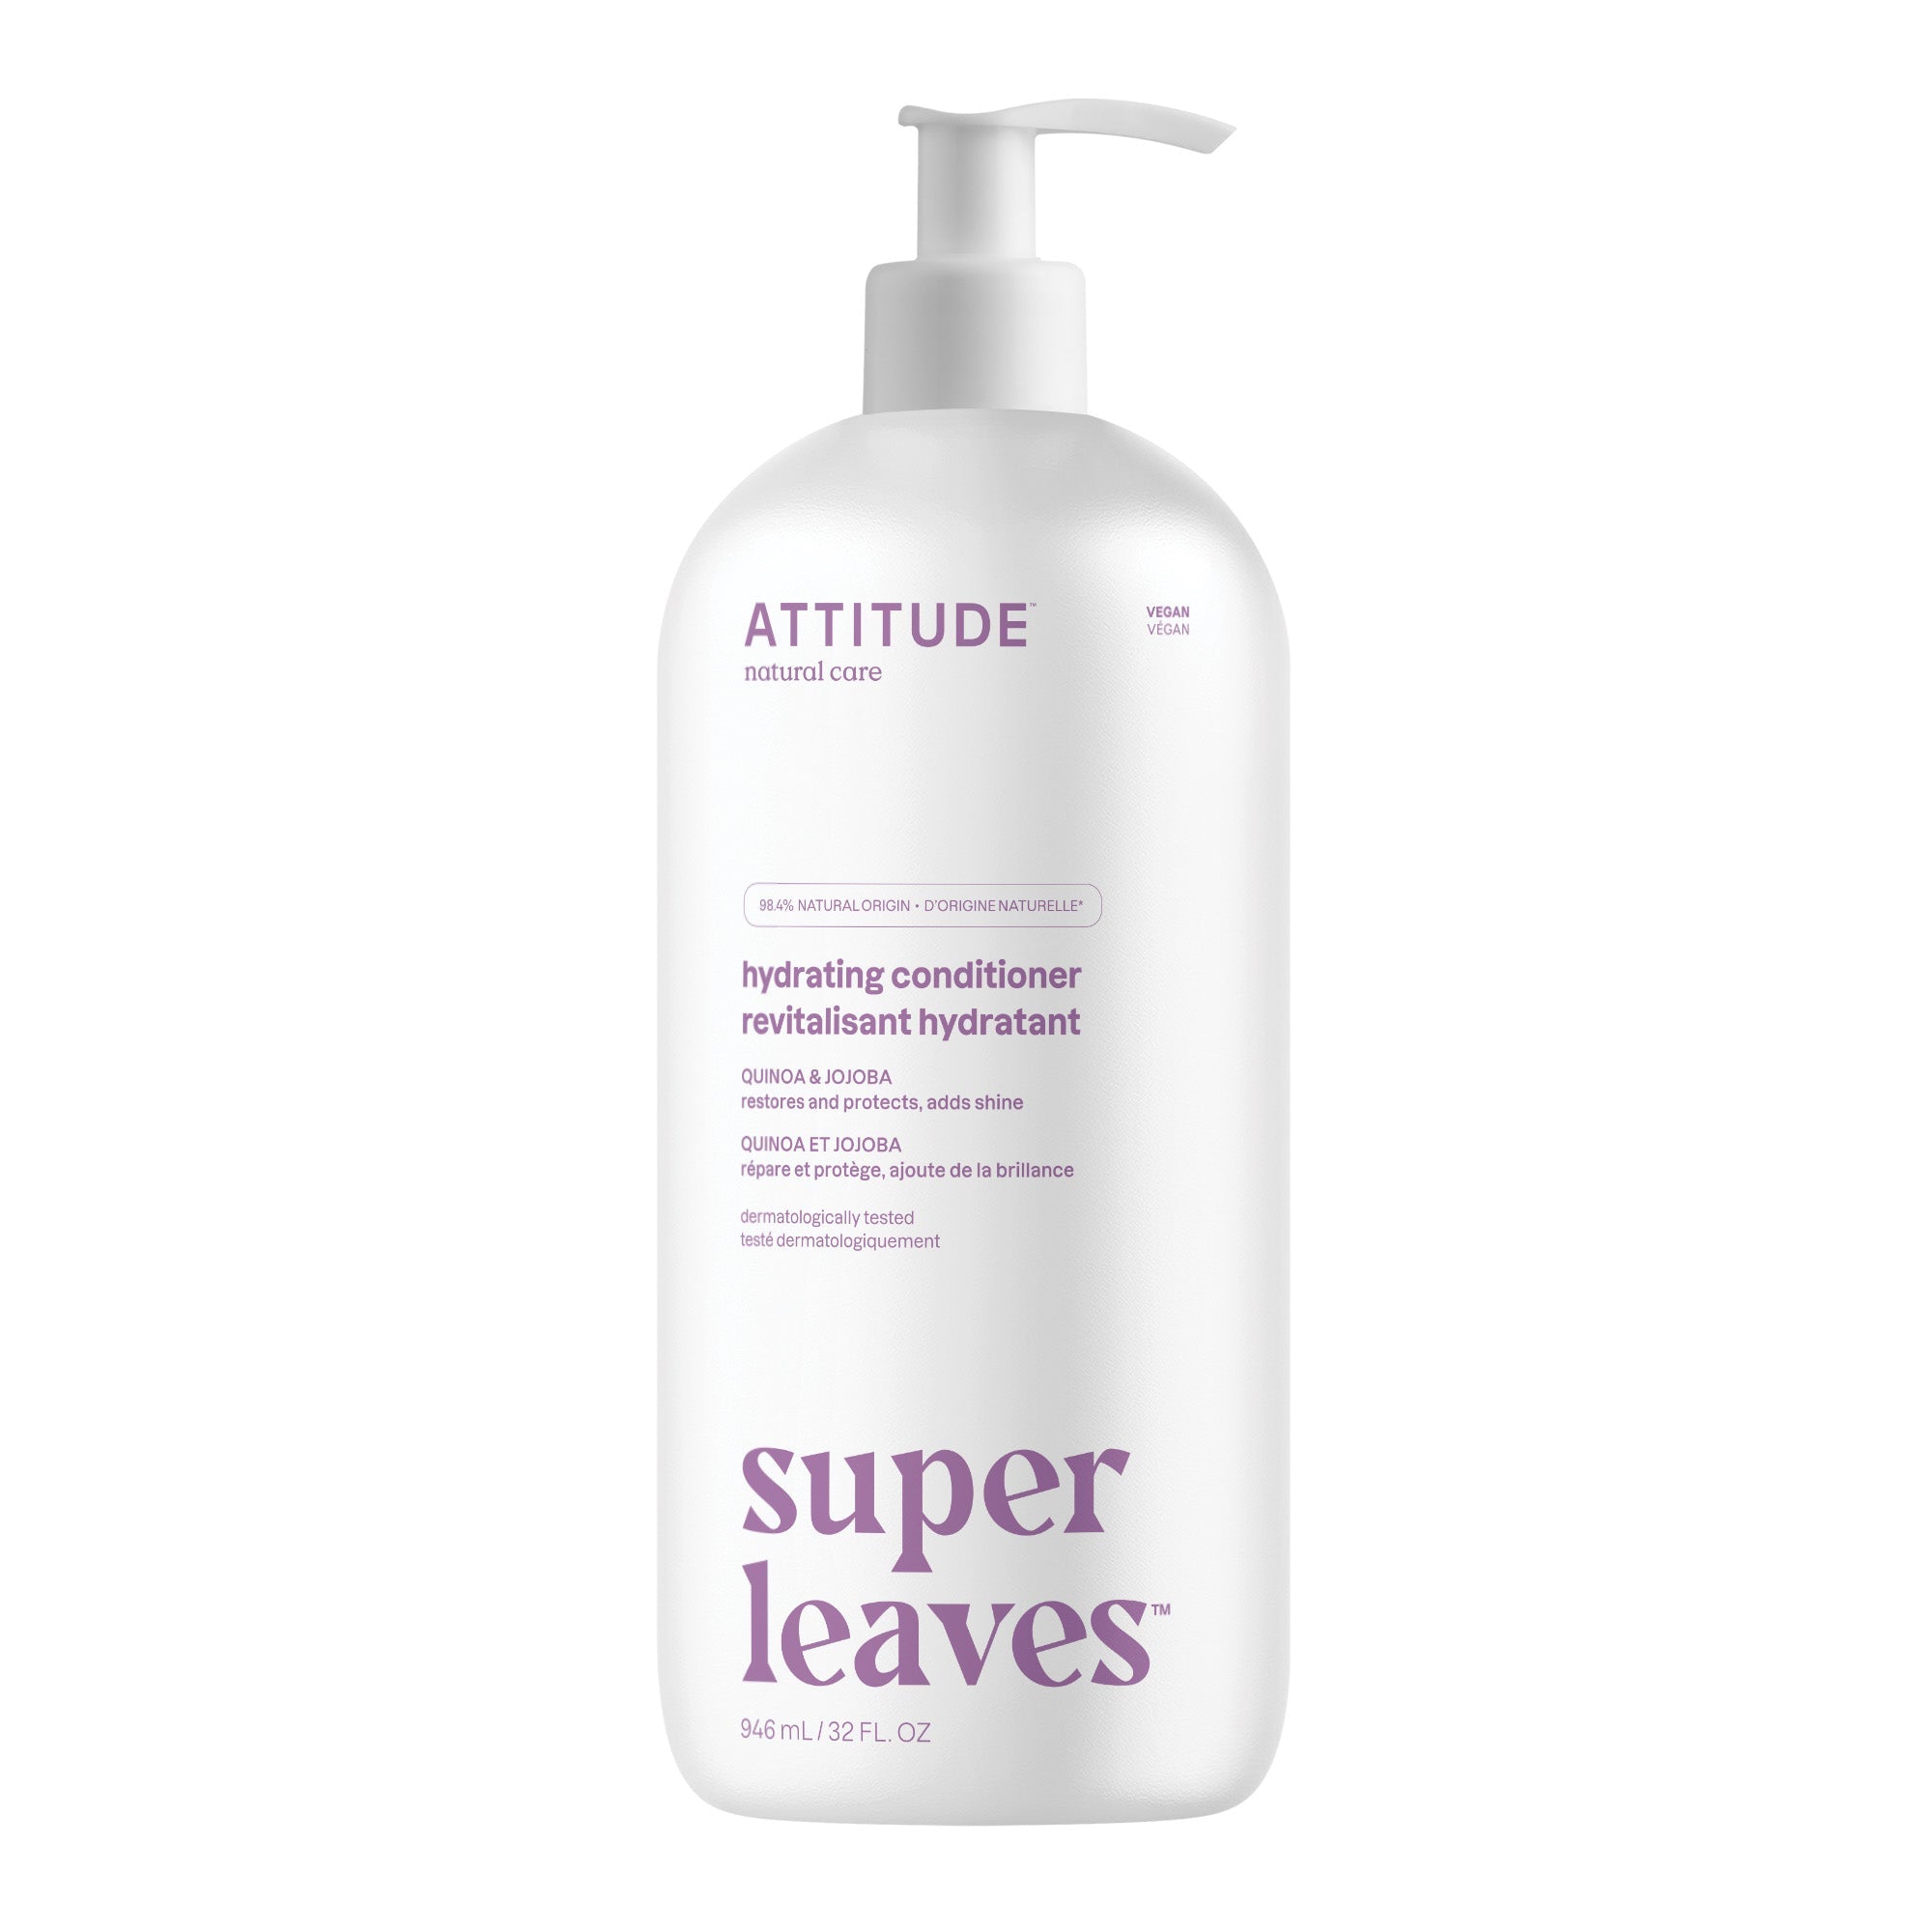 ATTITUDE Super Leaves Conditioner Moisture Rich Restores and protects, adds shine _en?_main? 946 mL